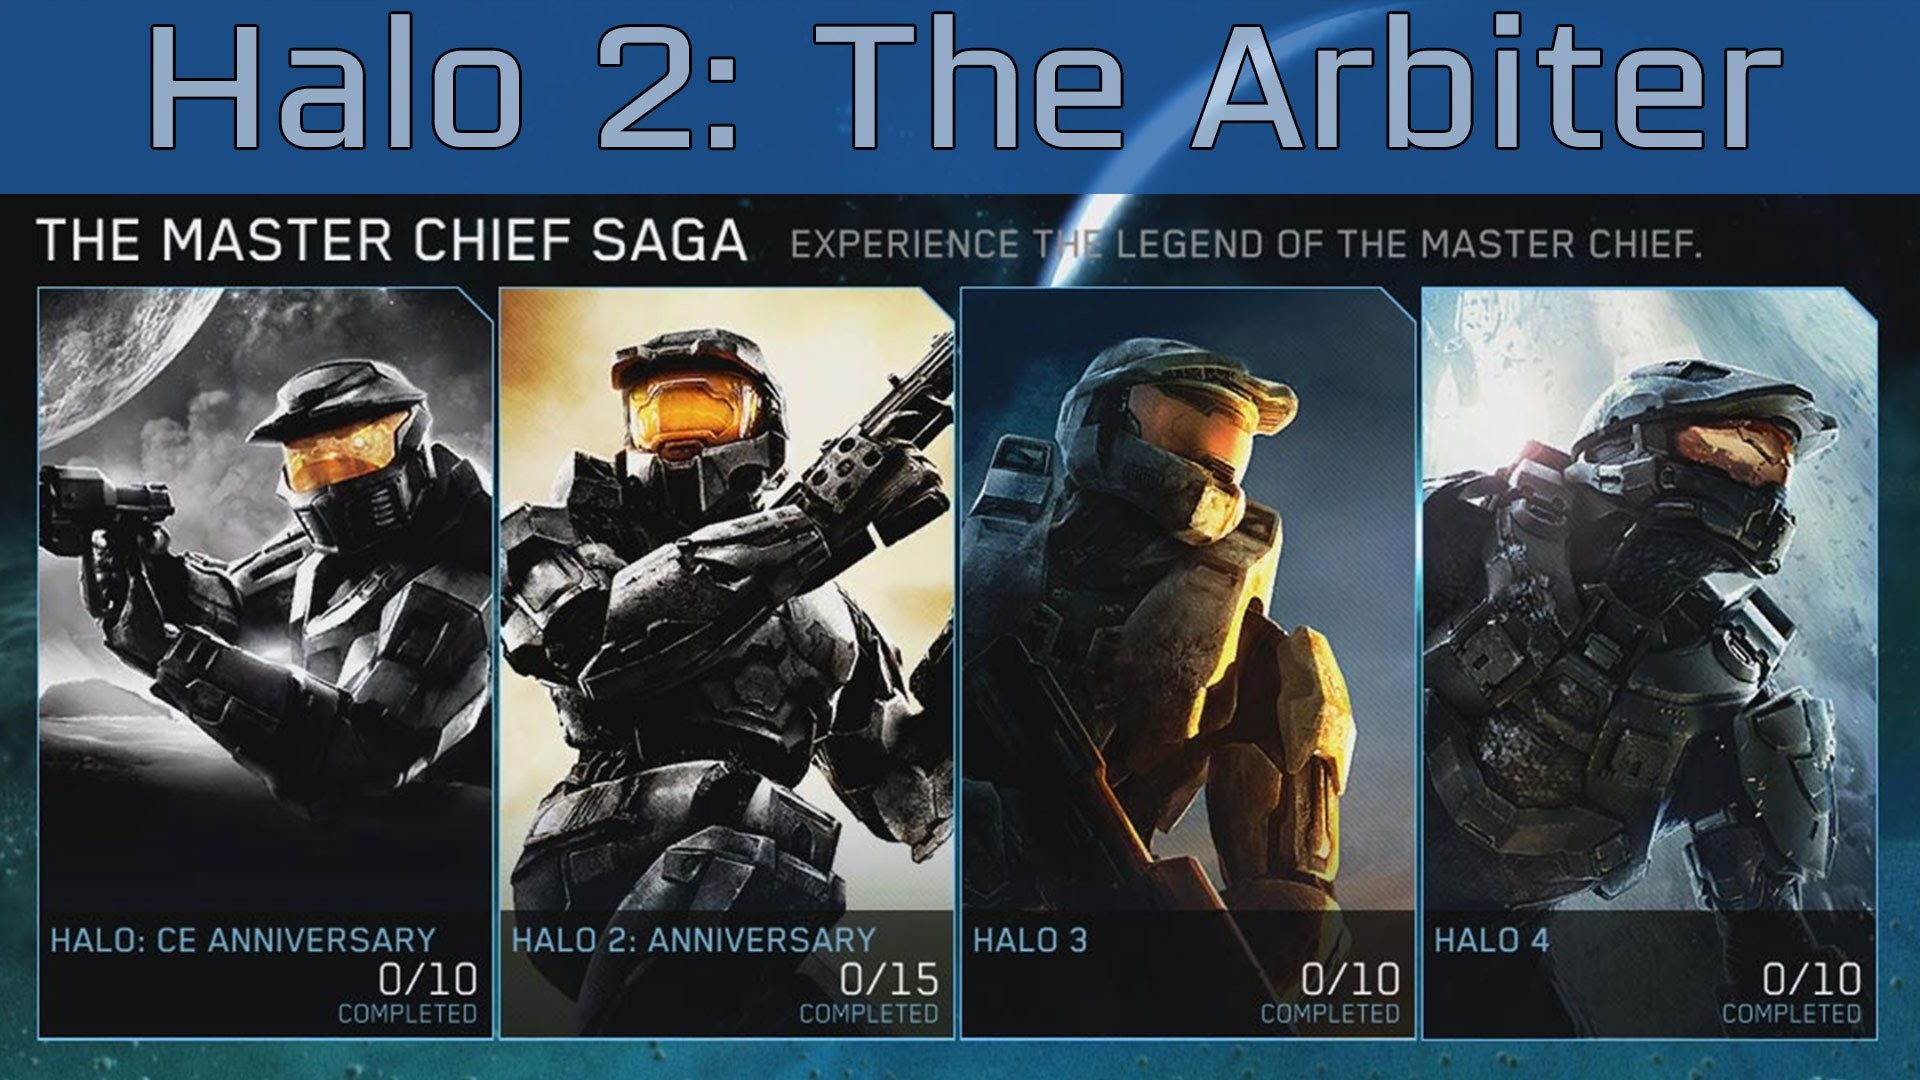 1920x1080 Halo: The Master Chief Collection - Halo 2: The Arbiter Walkthrough [HD  1080P] - YouTube